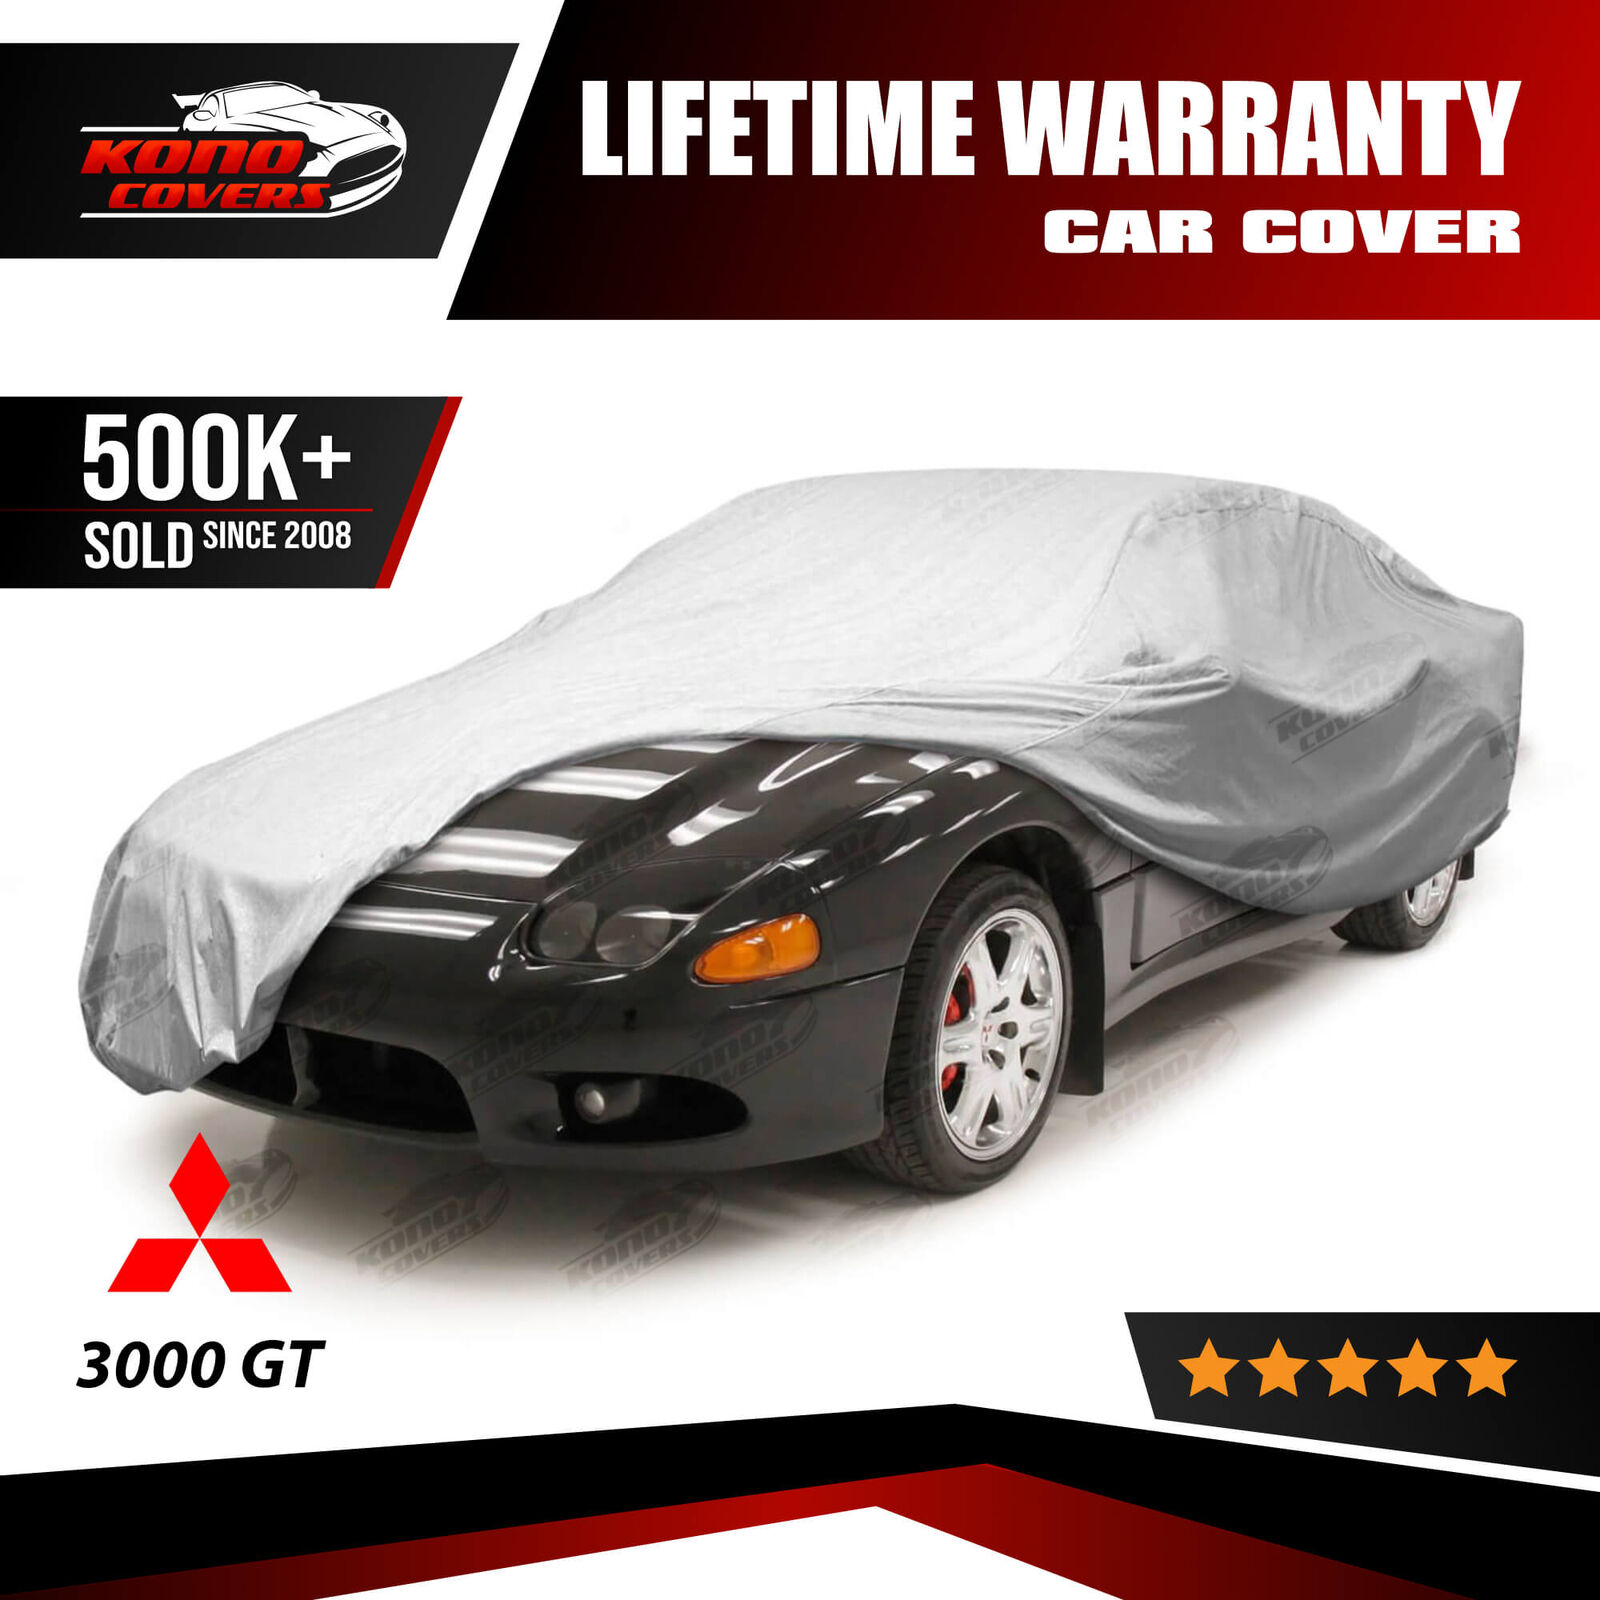 Mitsubishi 3000Gt Coupe 5 Layer Car Cover 1991 1992 1993 1994 1995 1996 1997